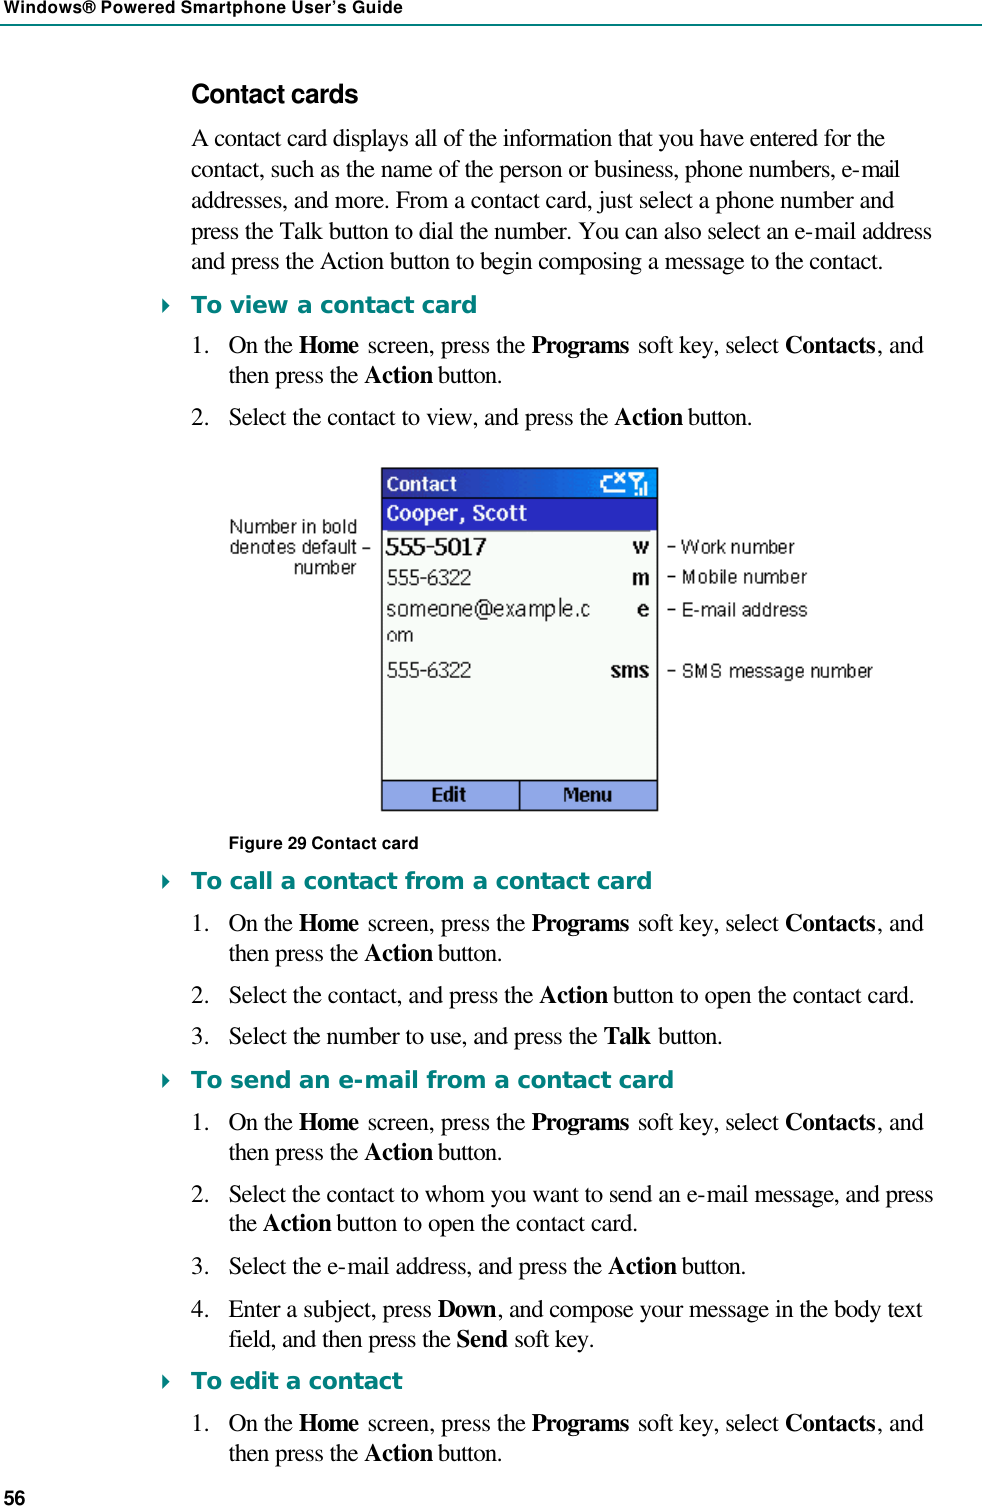 Windows® Powered Smartphone User’s Guide 56 Contact cards A contact card displays all of the information that you have entered for the contact, such as the name of the person or business, phone numbers, e-mail addresses, and more. From a contact card, just select a phone number and press the Talk button to dial the number. You can also select an e-mail address and press the Action button to begin composing a message to the contact. 4 To view a contact card 1.  On the Home screen, press the Programs soft key, select Contacts, and then press the Action button. 2.  Select the contact to view, and press the Action button.  Figure 29 Contact card 4 To call a contact from a contact card 1.  On the Home screen, press the Programs soft key, select Contacts, and then press the Action button. 2.  Select the contact, and press the Action button to open the contact card. 3.  Select the number to use, and press the Talk button. 4 To send an e-mail from a contact card 1.  On the Home screen, press the Programs soft key, select Contacts, and then press the Action button. 2.  Select the contact to whom you want to send an e-mail message, and press the Action button to open the contact card. 3.  Select the e-mail address, and press the Action button. 4.  Enter a subject, press Down, and compose your message in the body text field, and then press the Send soft key. 4 To edit a contact 1.  On the Home screen, press the Programs soft key, select Contacts, and then press the Action button. 